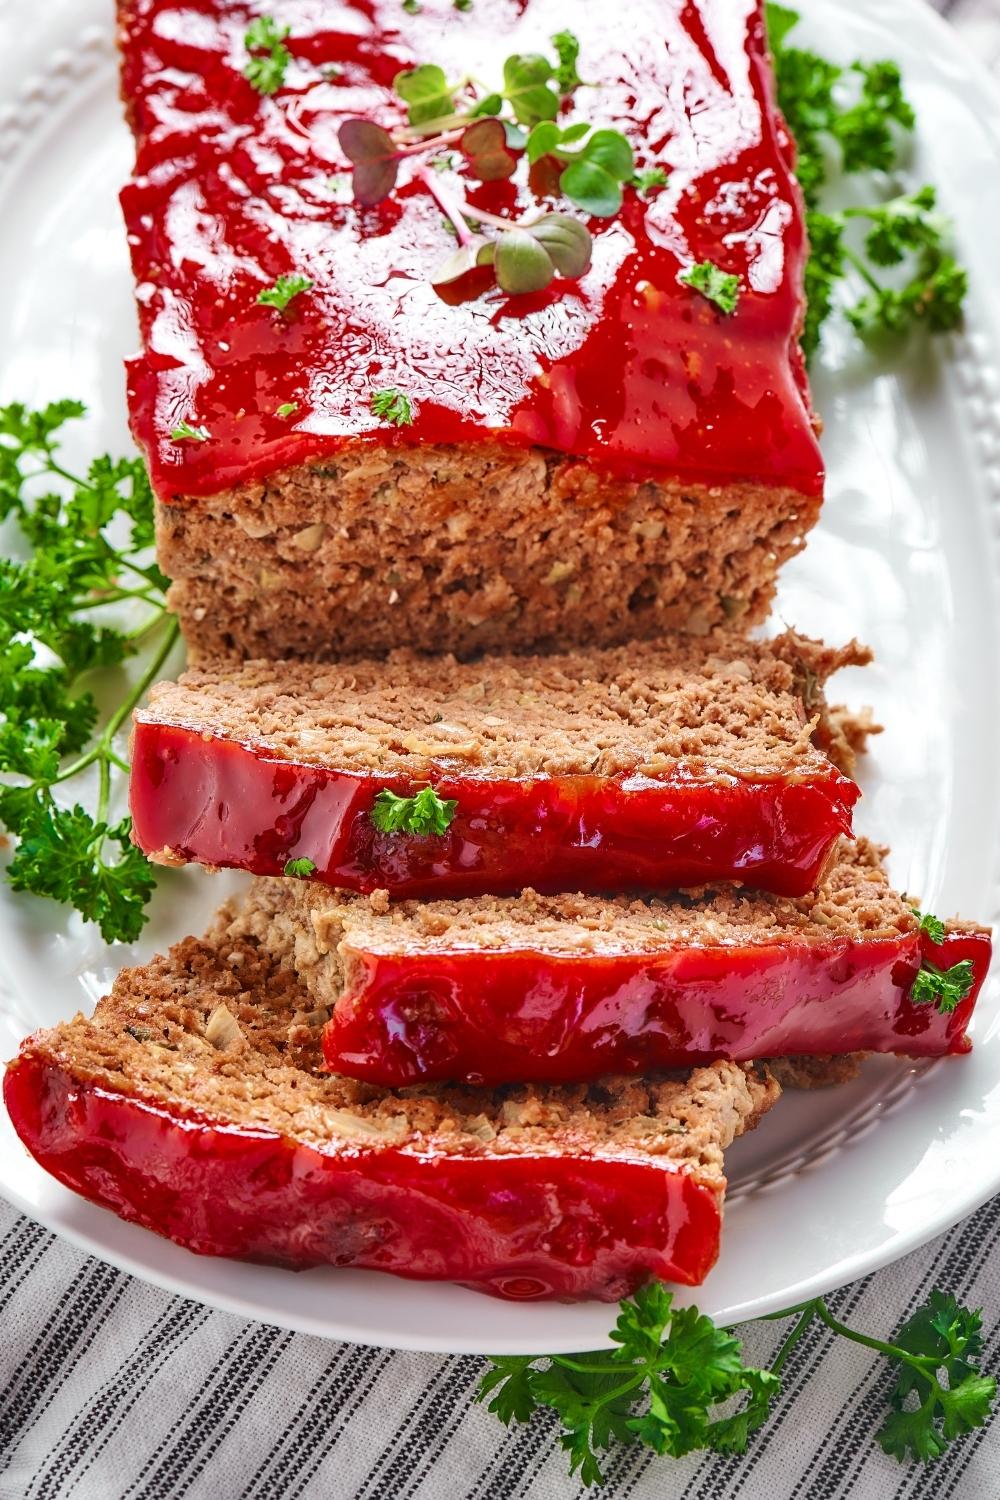 Three slices of meatloaf on top of one another on a white plate. The slices are touching part of the whole meatloaf.